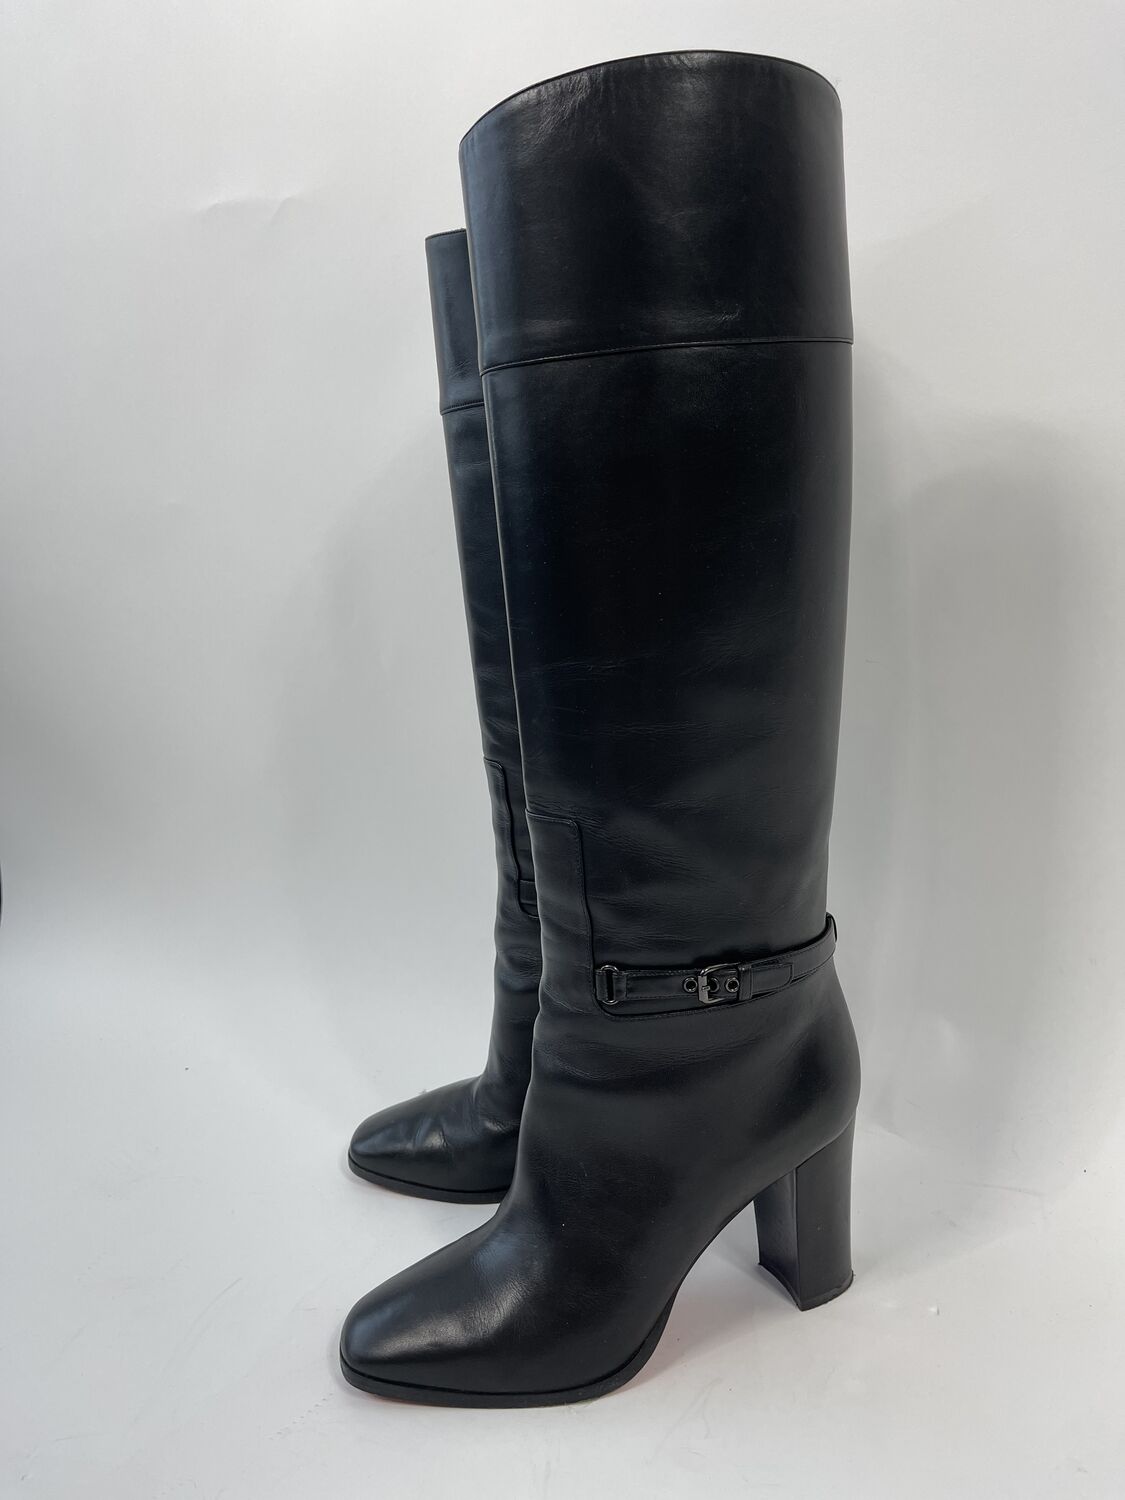 Leather Knee high Boots Christian Louboutin - 38, buy pre-owned at 350 EUR